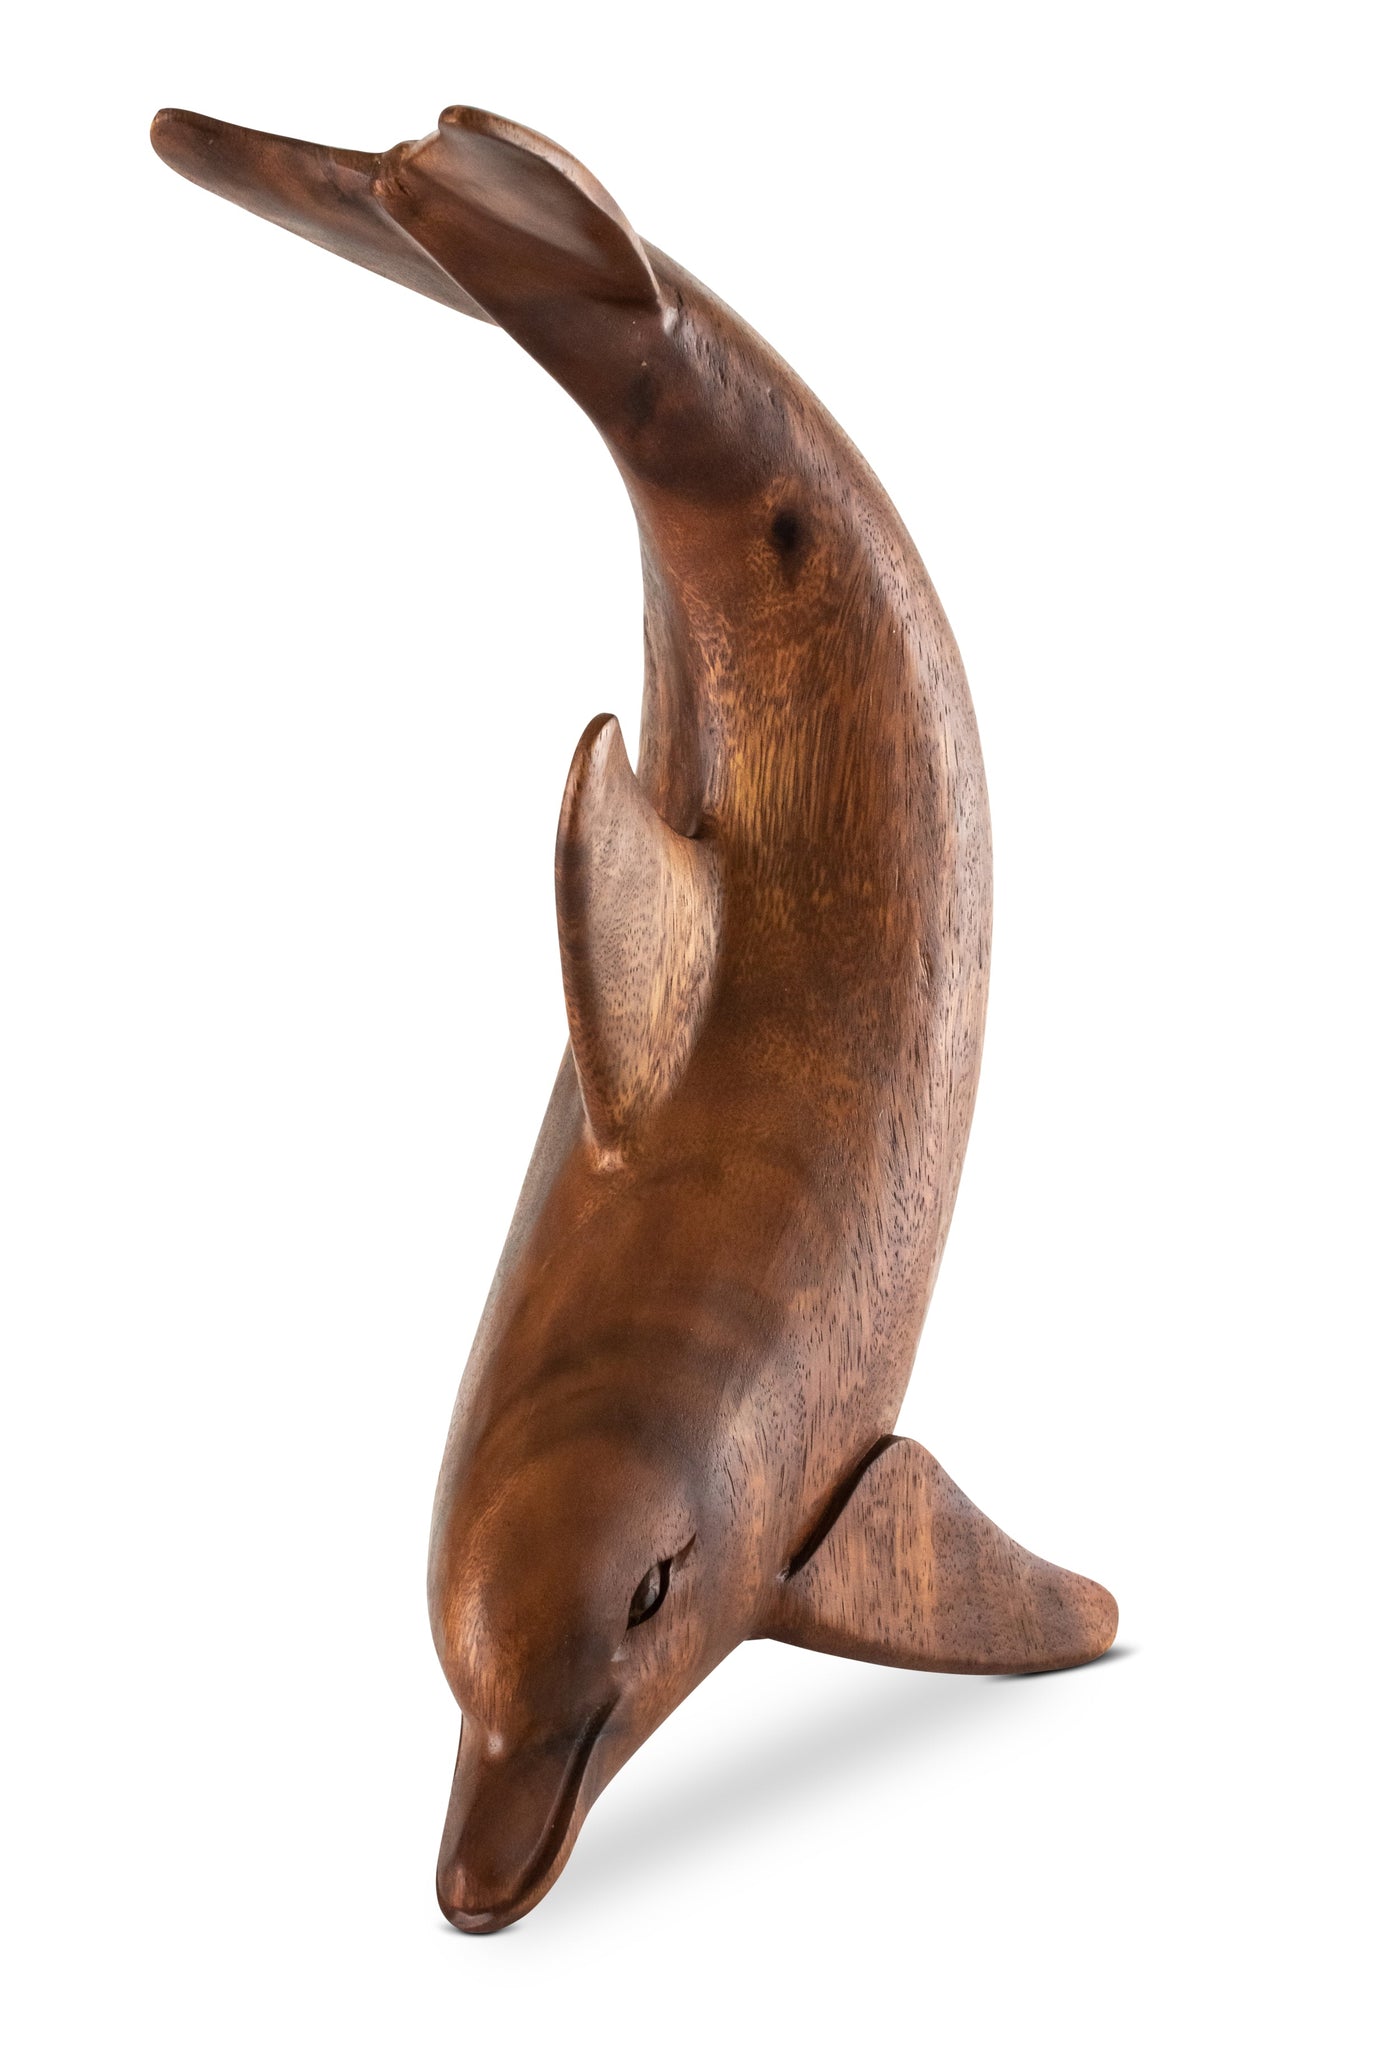 12" Wooden Hand Carved Dancing Dolphin Statue Sculpture Wood Decor Fish Figurine Handcrafted Handmade Seaside Tropical Nautical Ocean Coastal